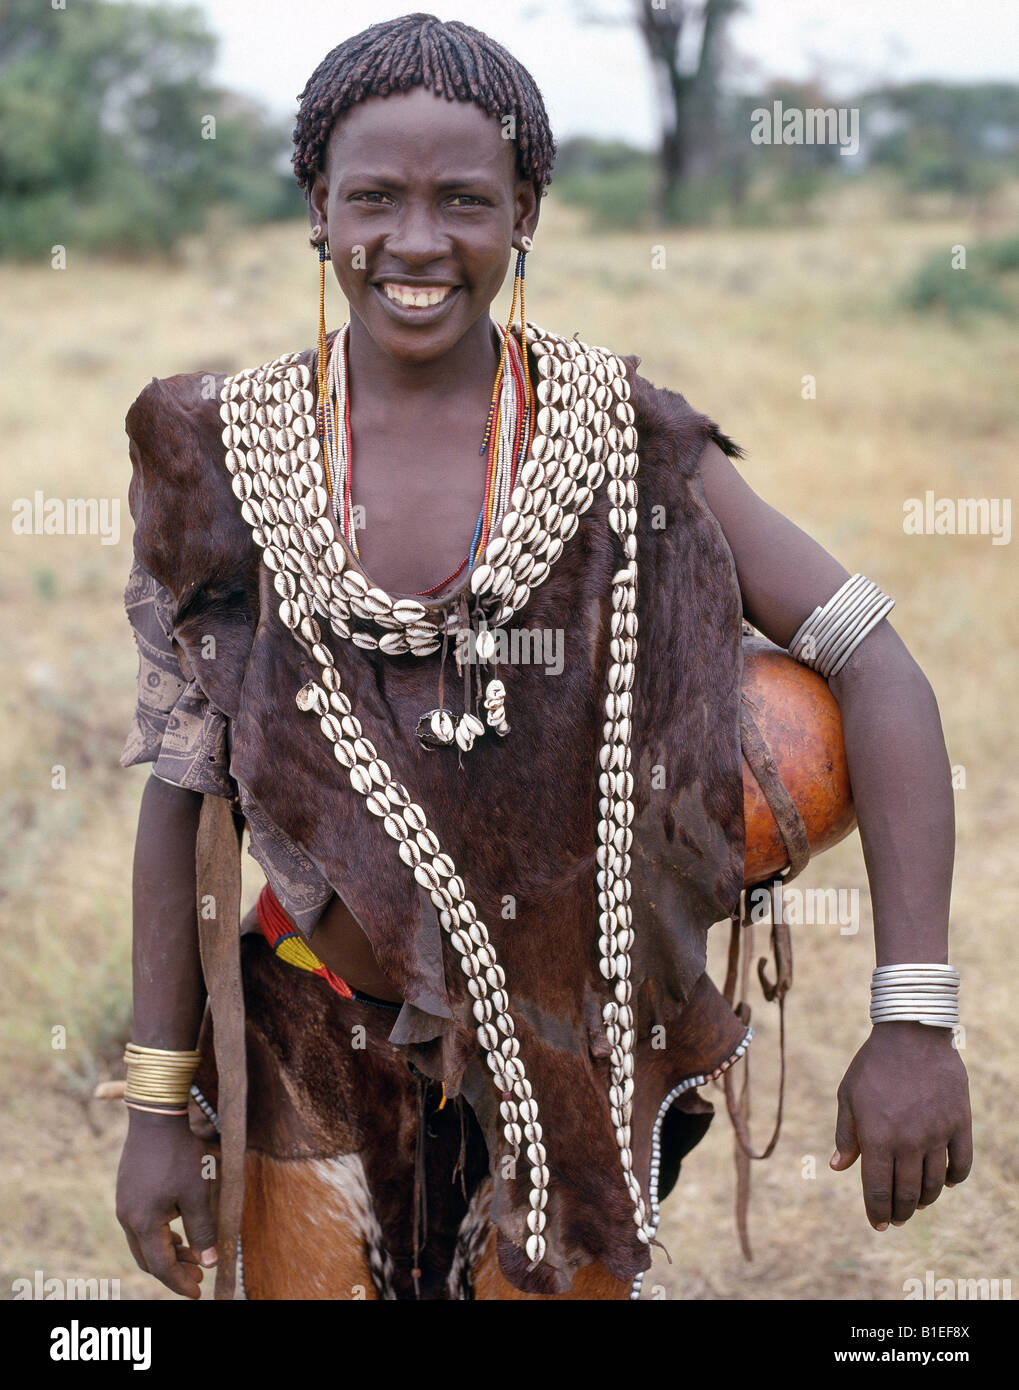 A woman of the Tsemay tribe of remote Southwest Ethiopia wears attractively decorated leather clothes. Stock Photo